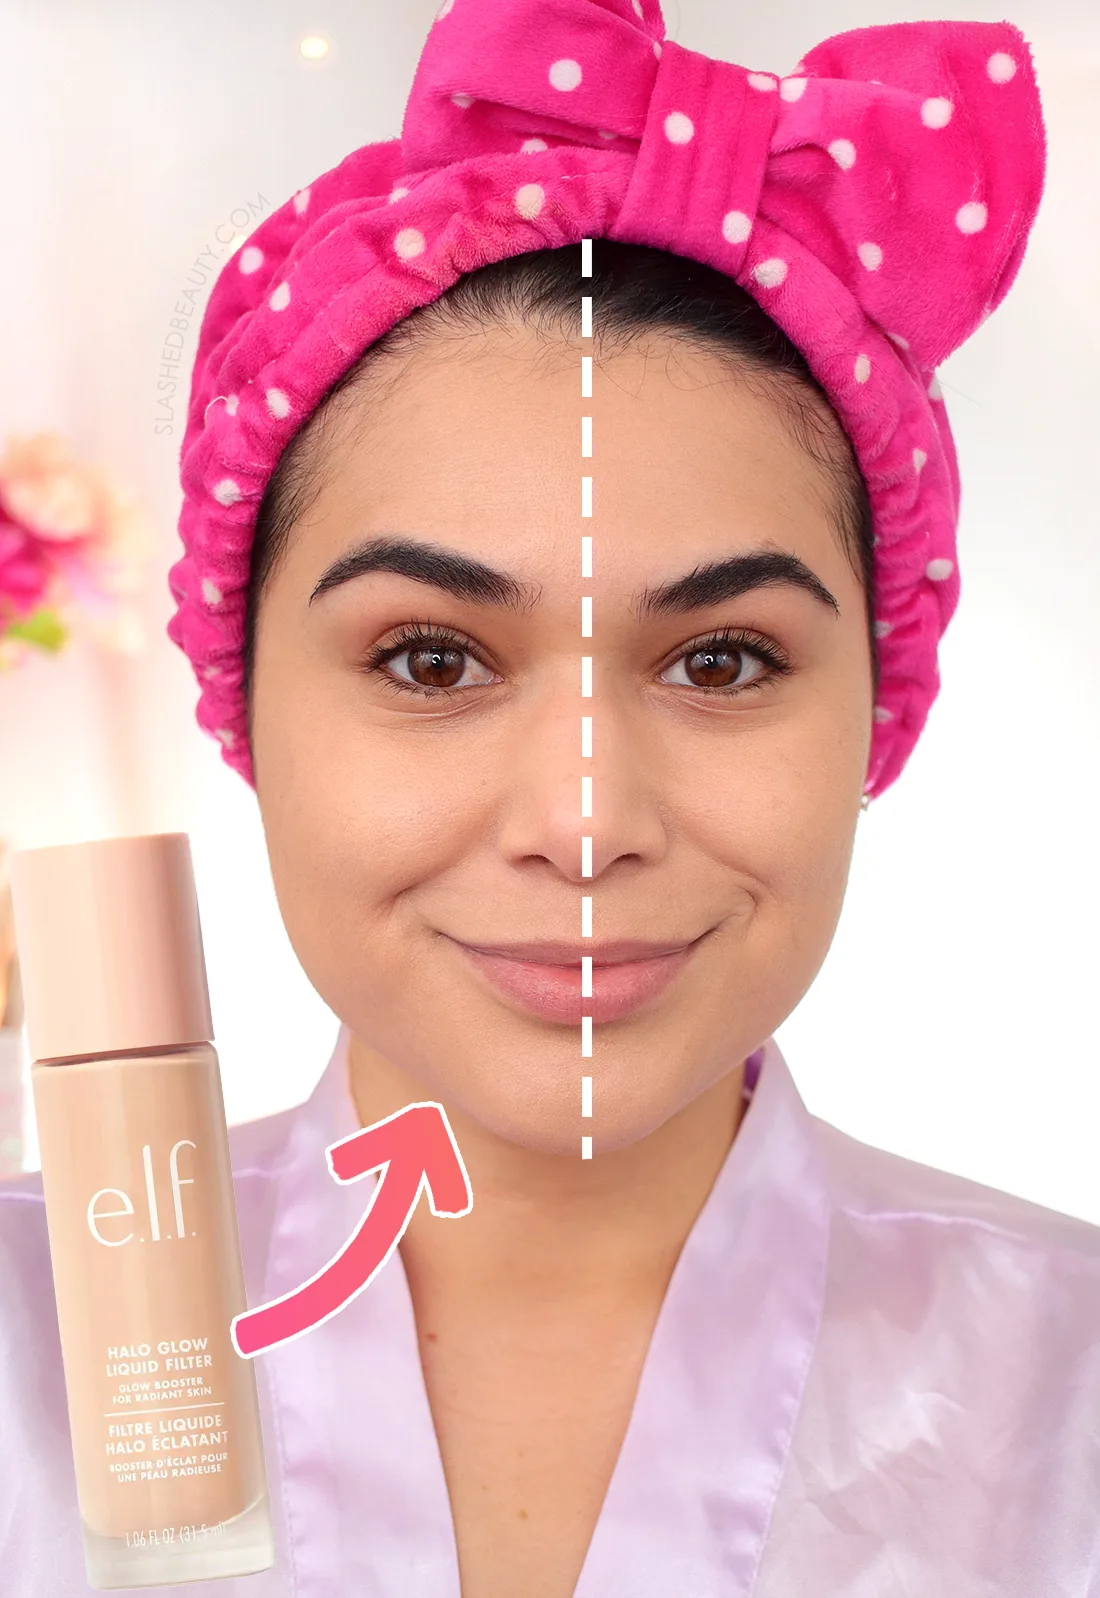 Before and after using elf Halo Glow Liquid Filter | Review | Slashed Beauty